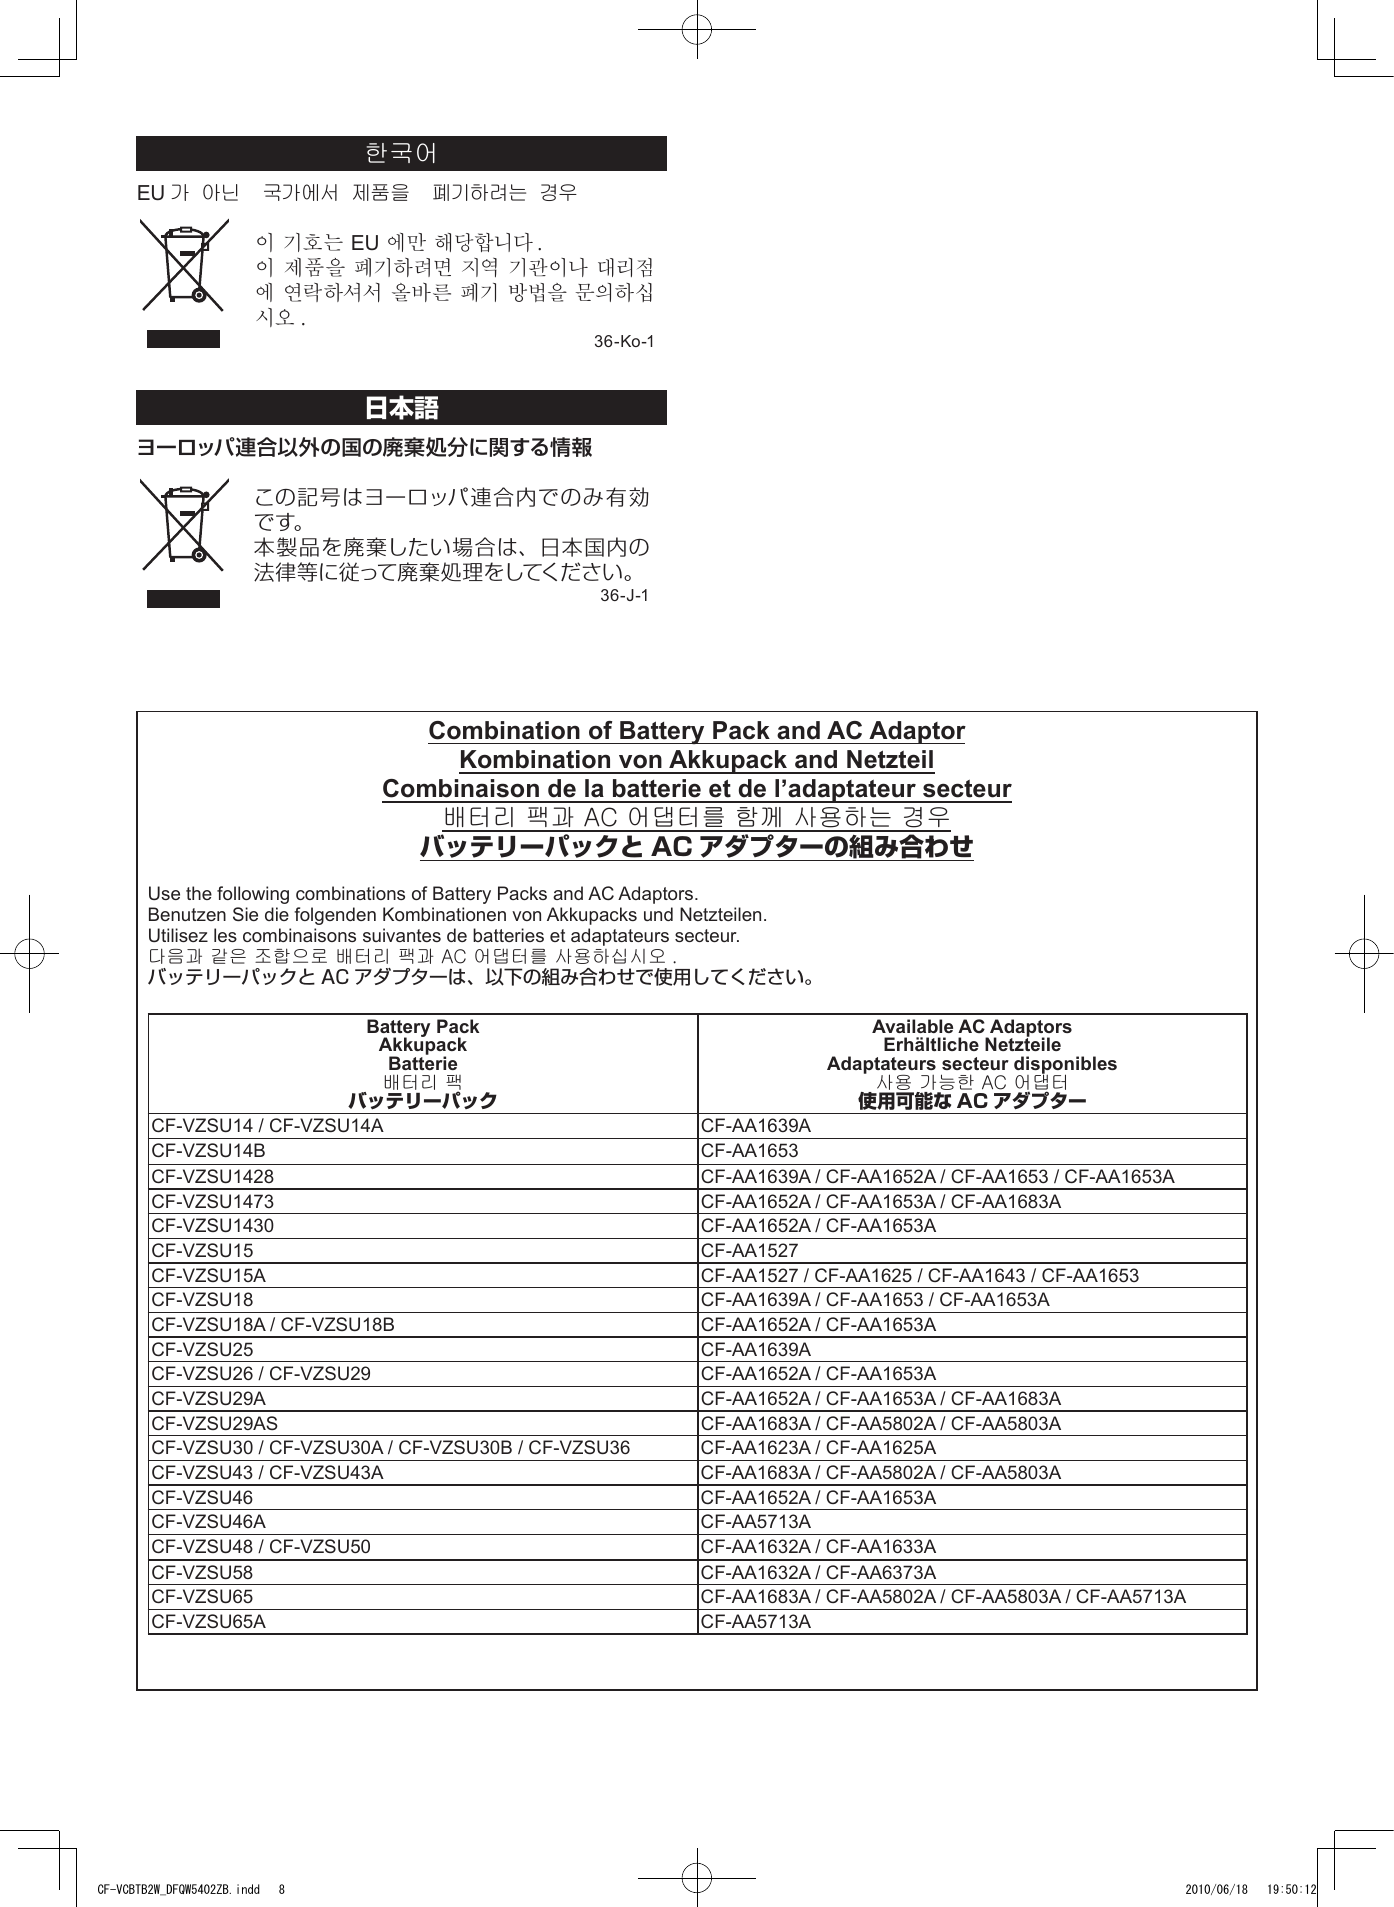 Page 7 of 8 - Panasonic CF-VCBxxx (Battery Charger) Operating Instructions User Manual : (English/ German/ French/ Korean/ Japanese) (Revision) Vcbtb2w-oi-dfqw5402ya-non-nonlogo-JMGFKO-p20110780